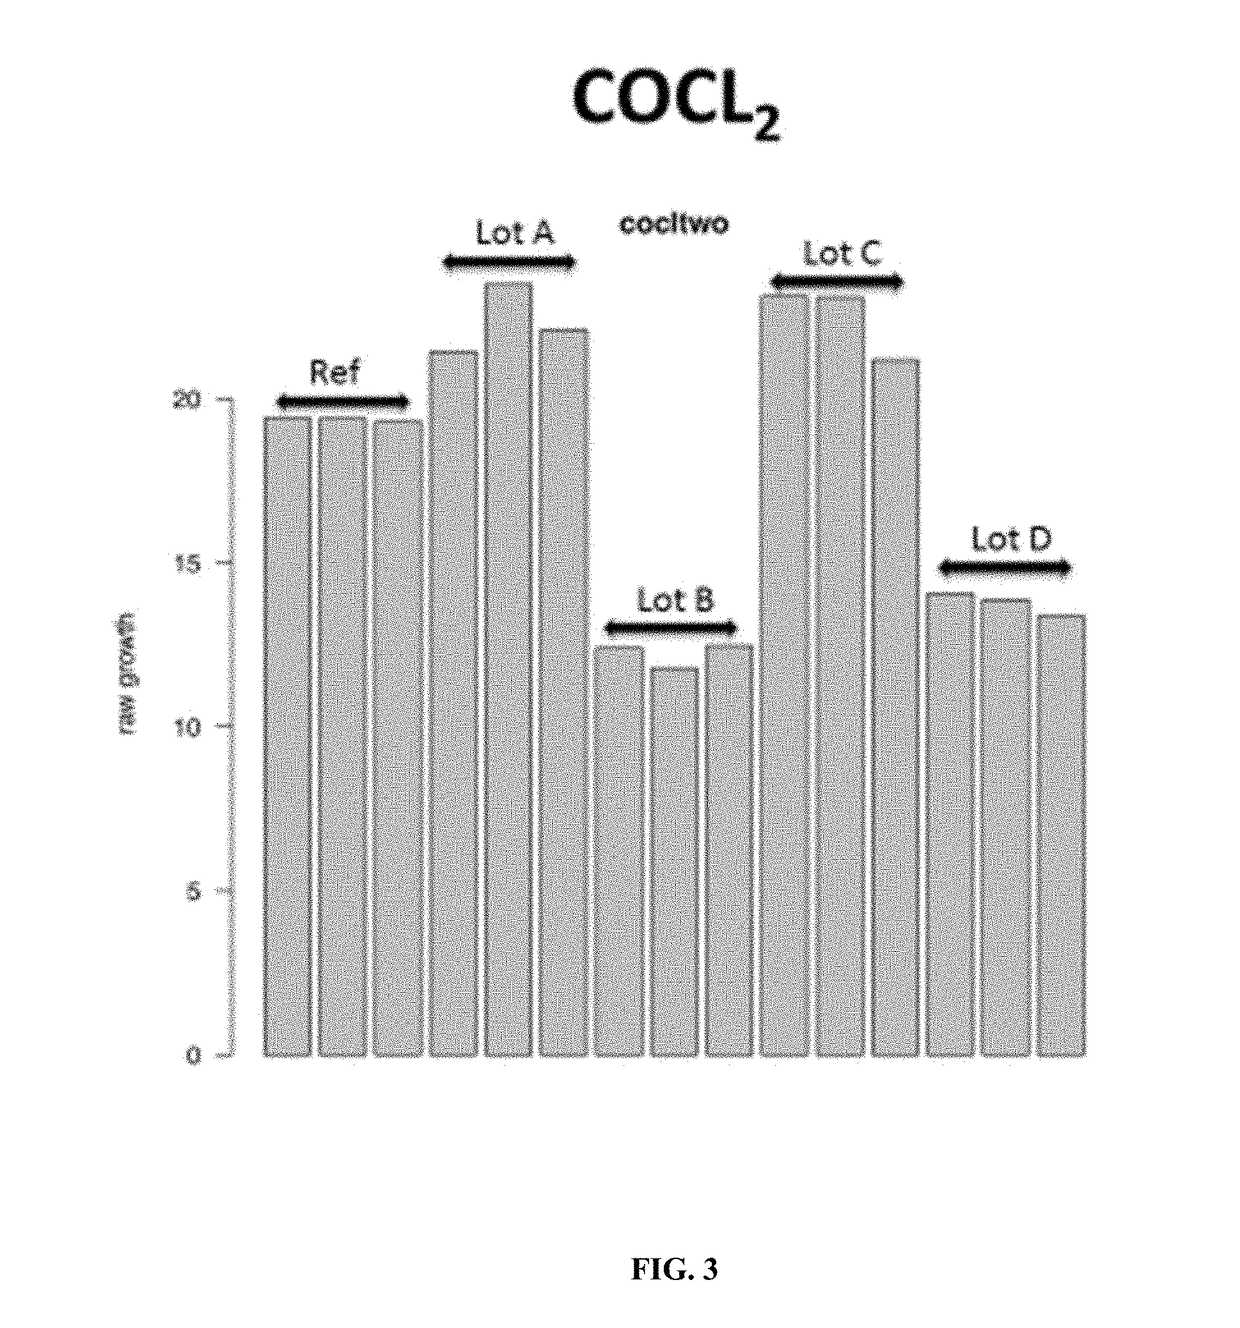 Method Of Determining A Compositional Or Functional Characteristic Of A Cell Culture Media